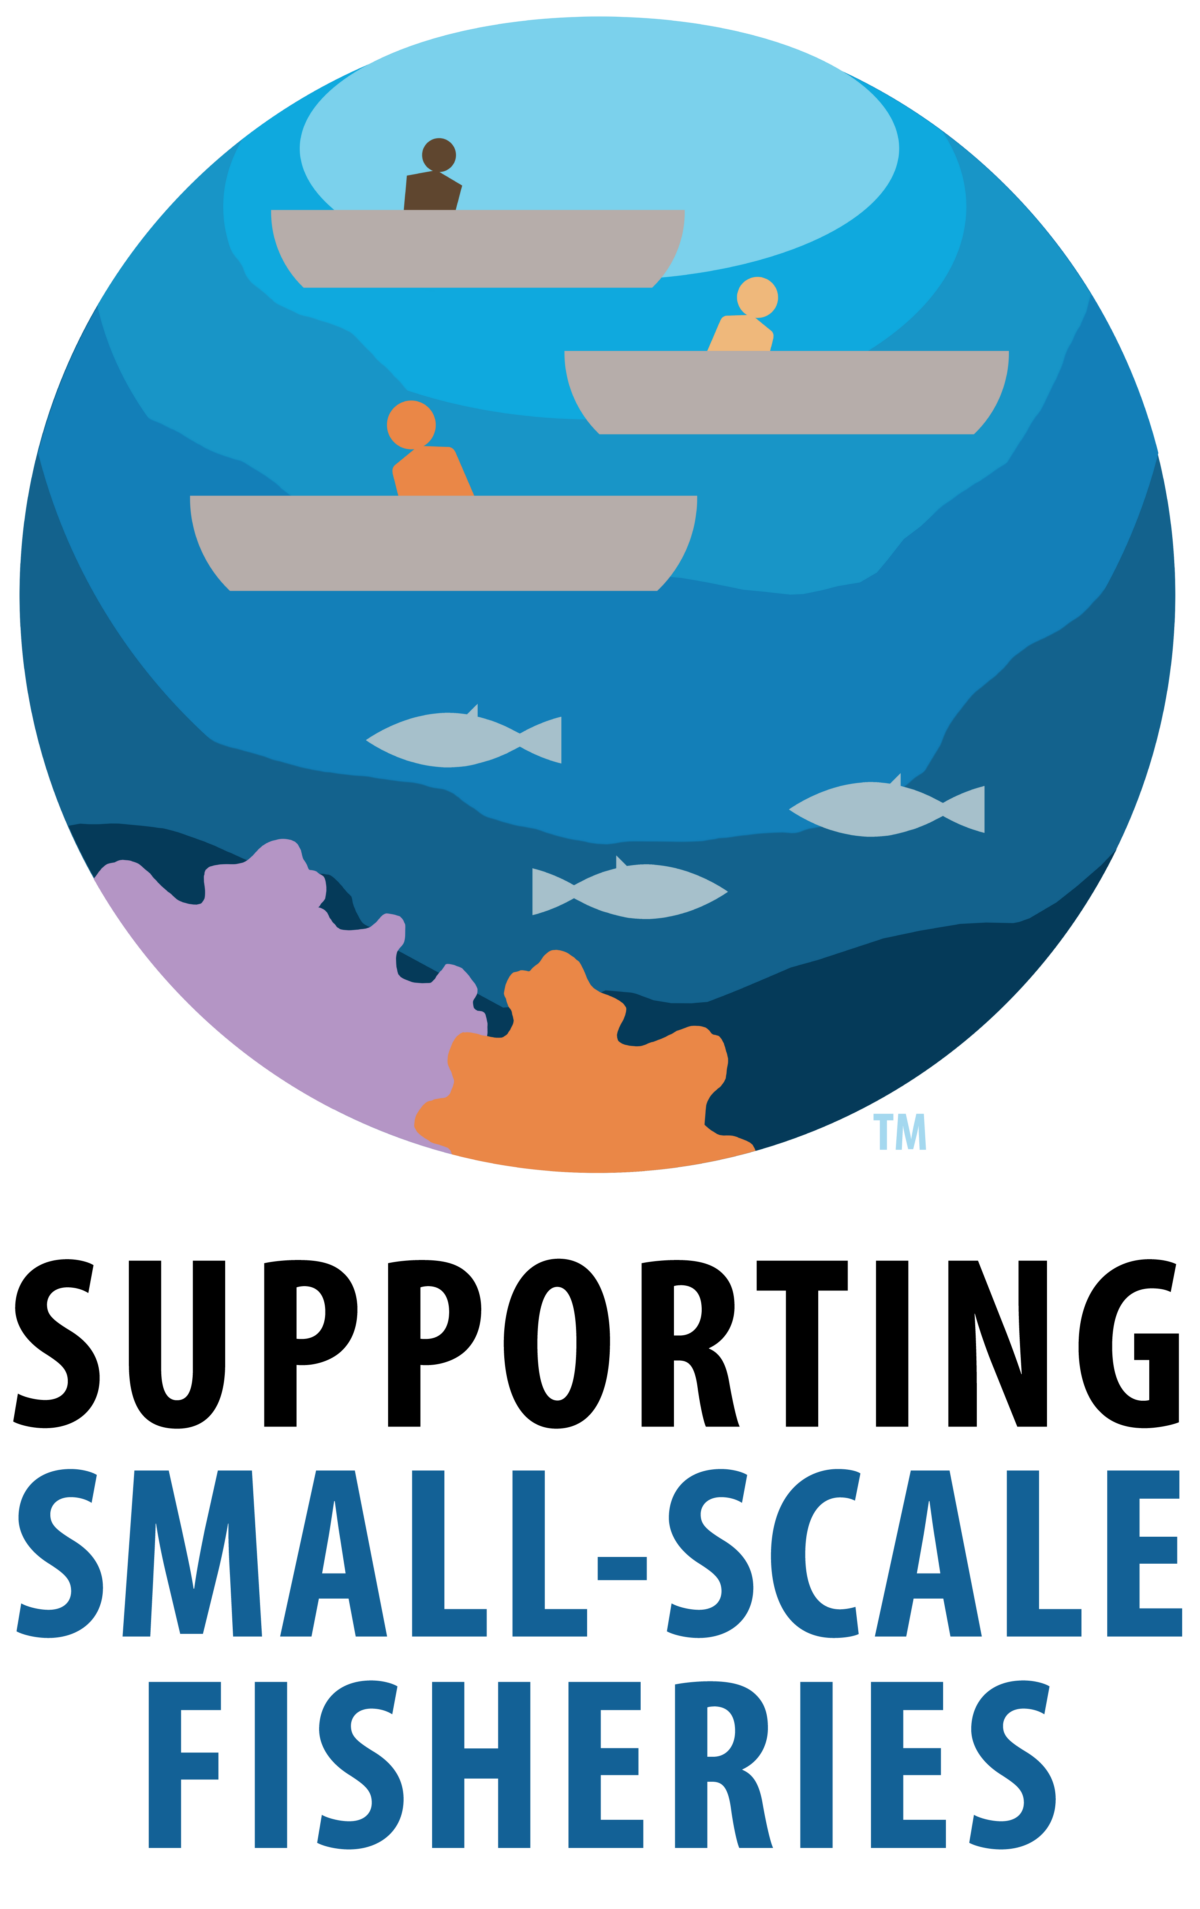 Small-scale fisheries logo